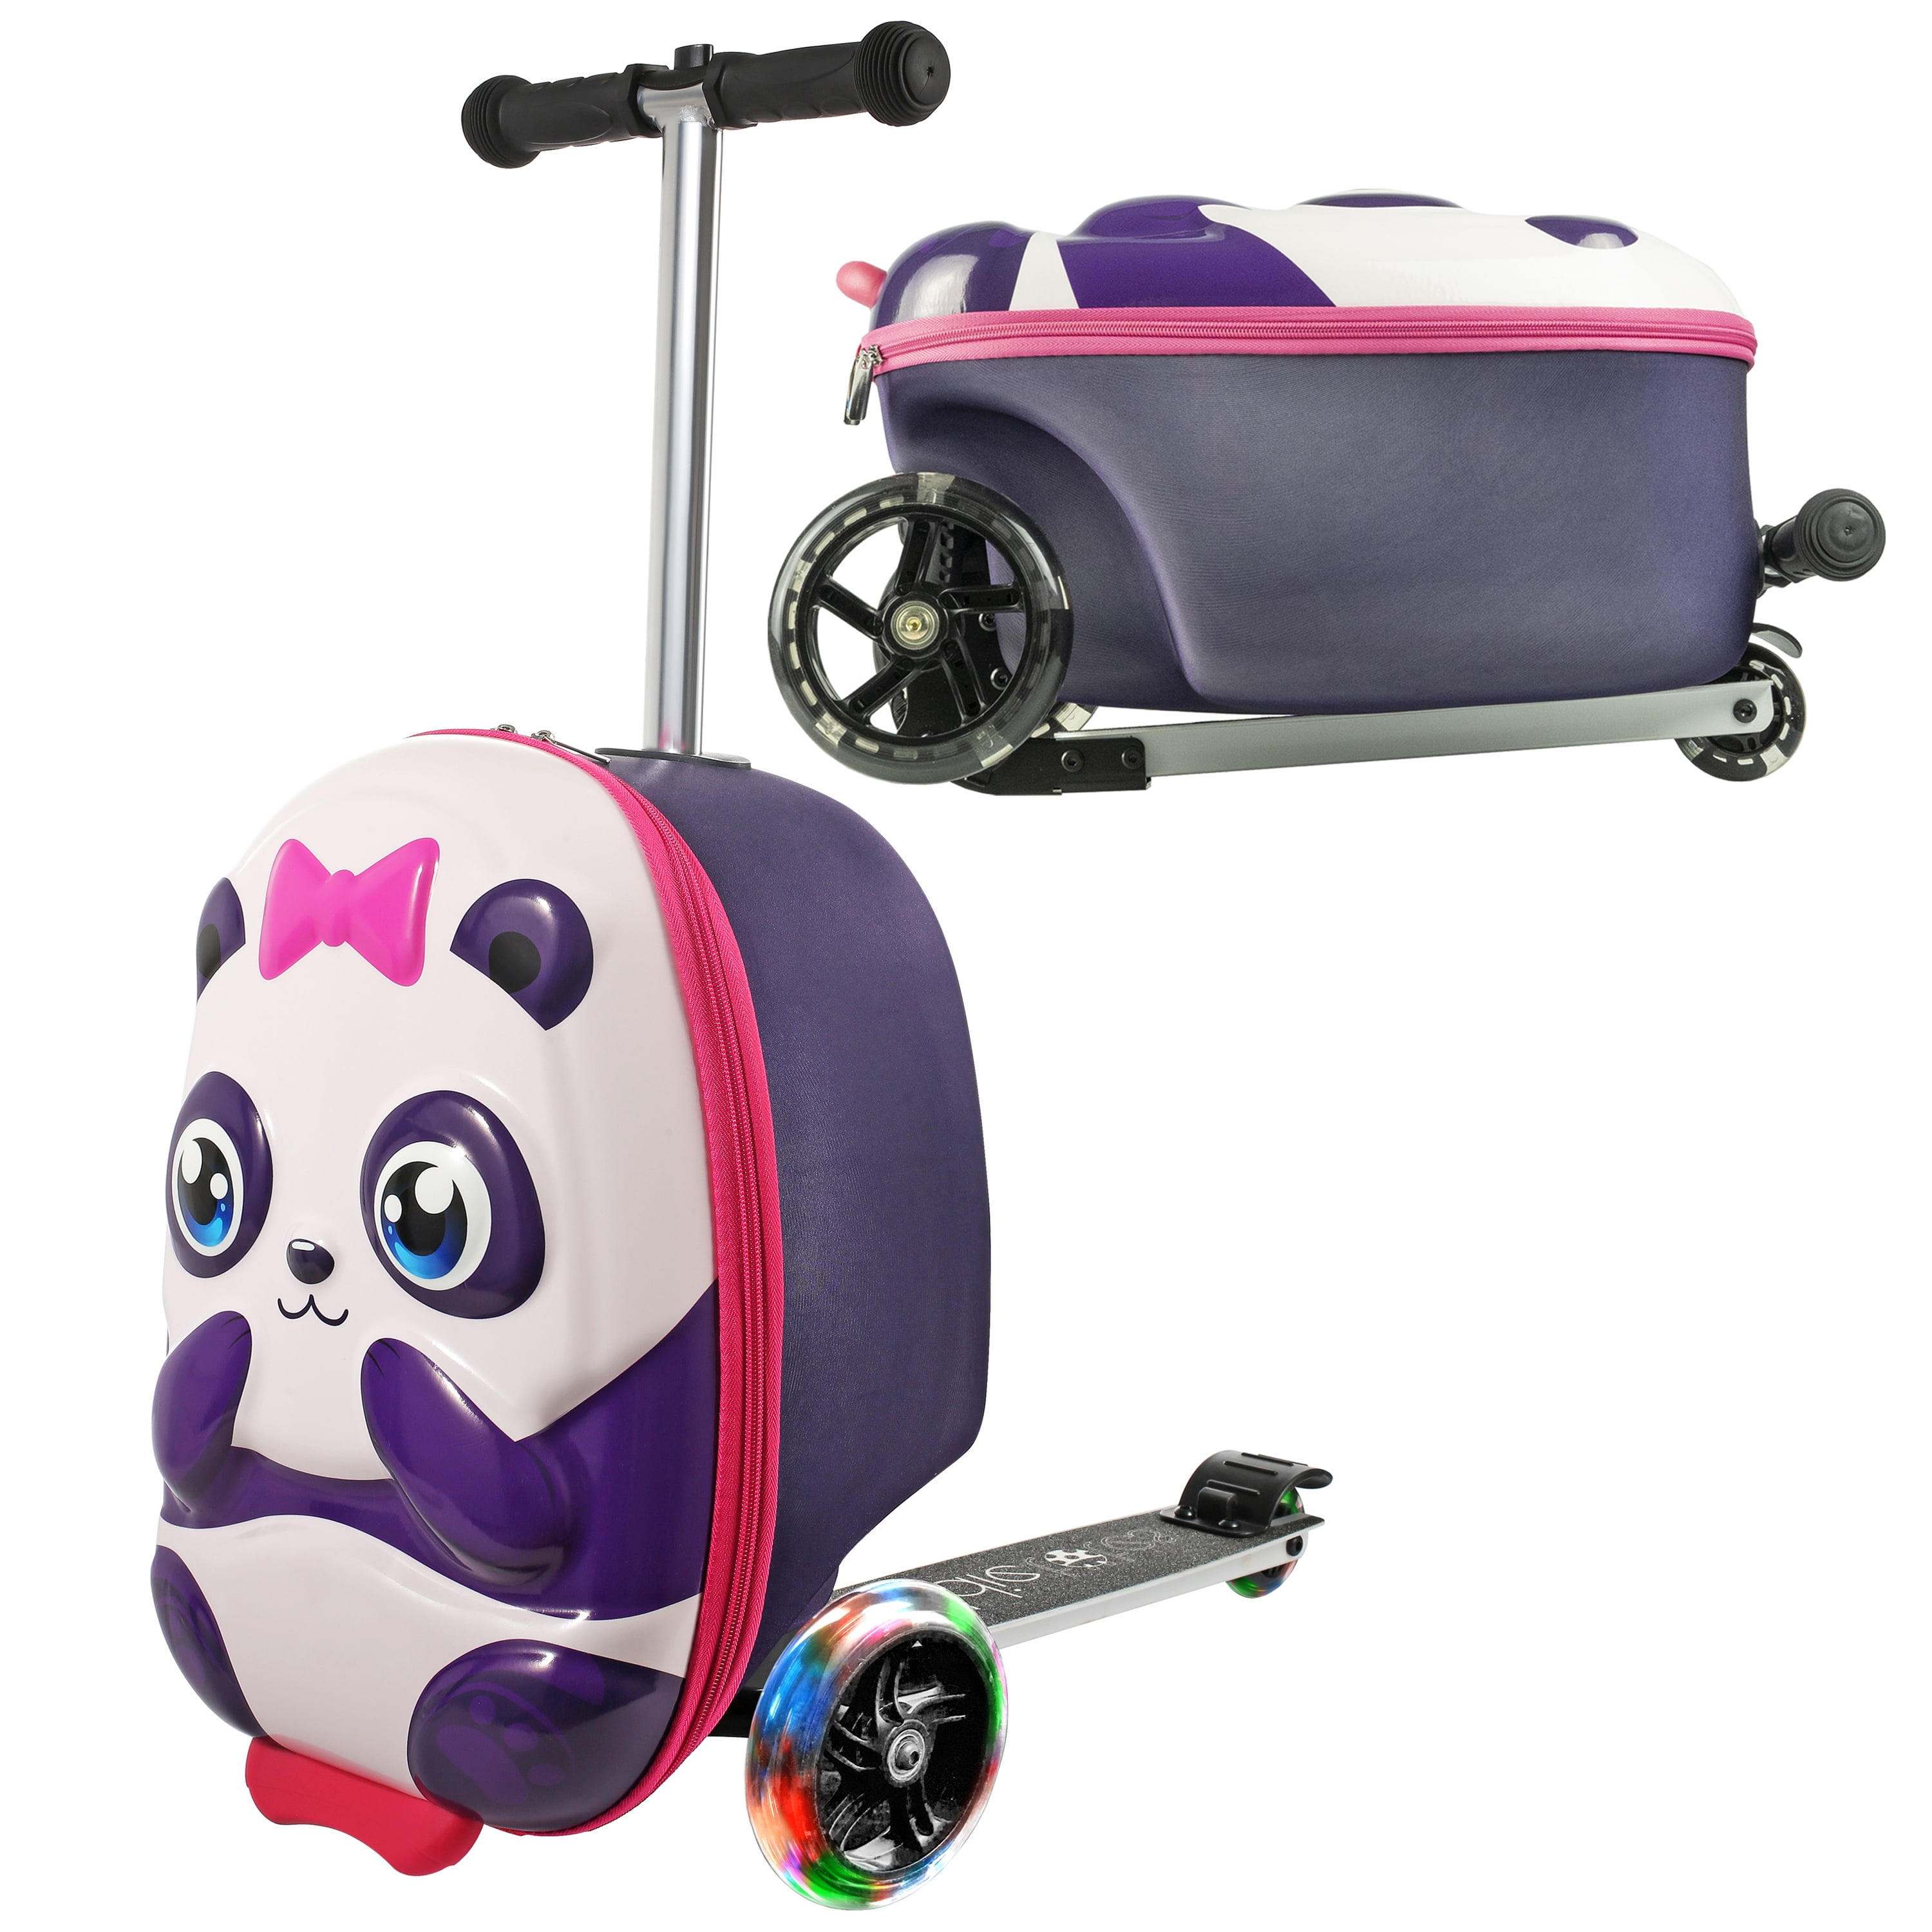 Kiddietotes Panda 3D Hard Shell Scooter Ride-on Suitcase for Kids